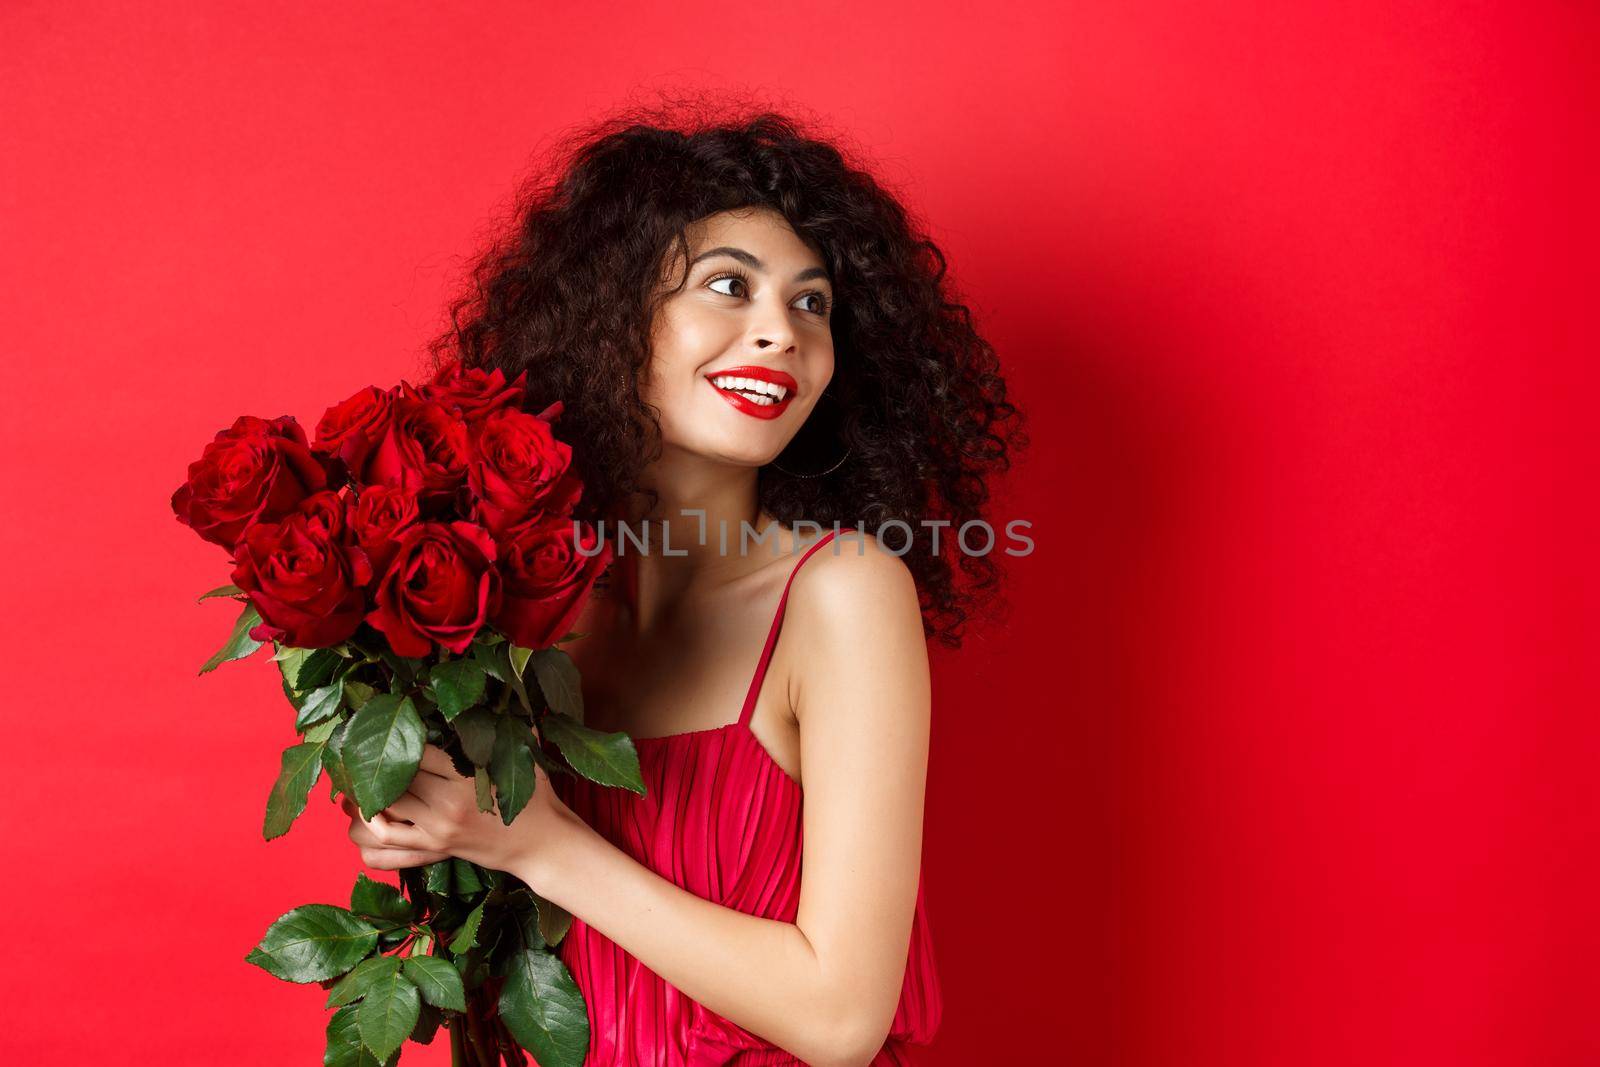 Tender young woman in elegant red dress, holding romantic bouquet of red roses and looking right, smiling dreamy, thinking about lover on Valentines day, studio background.